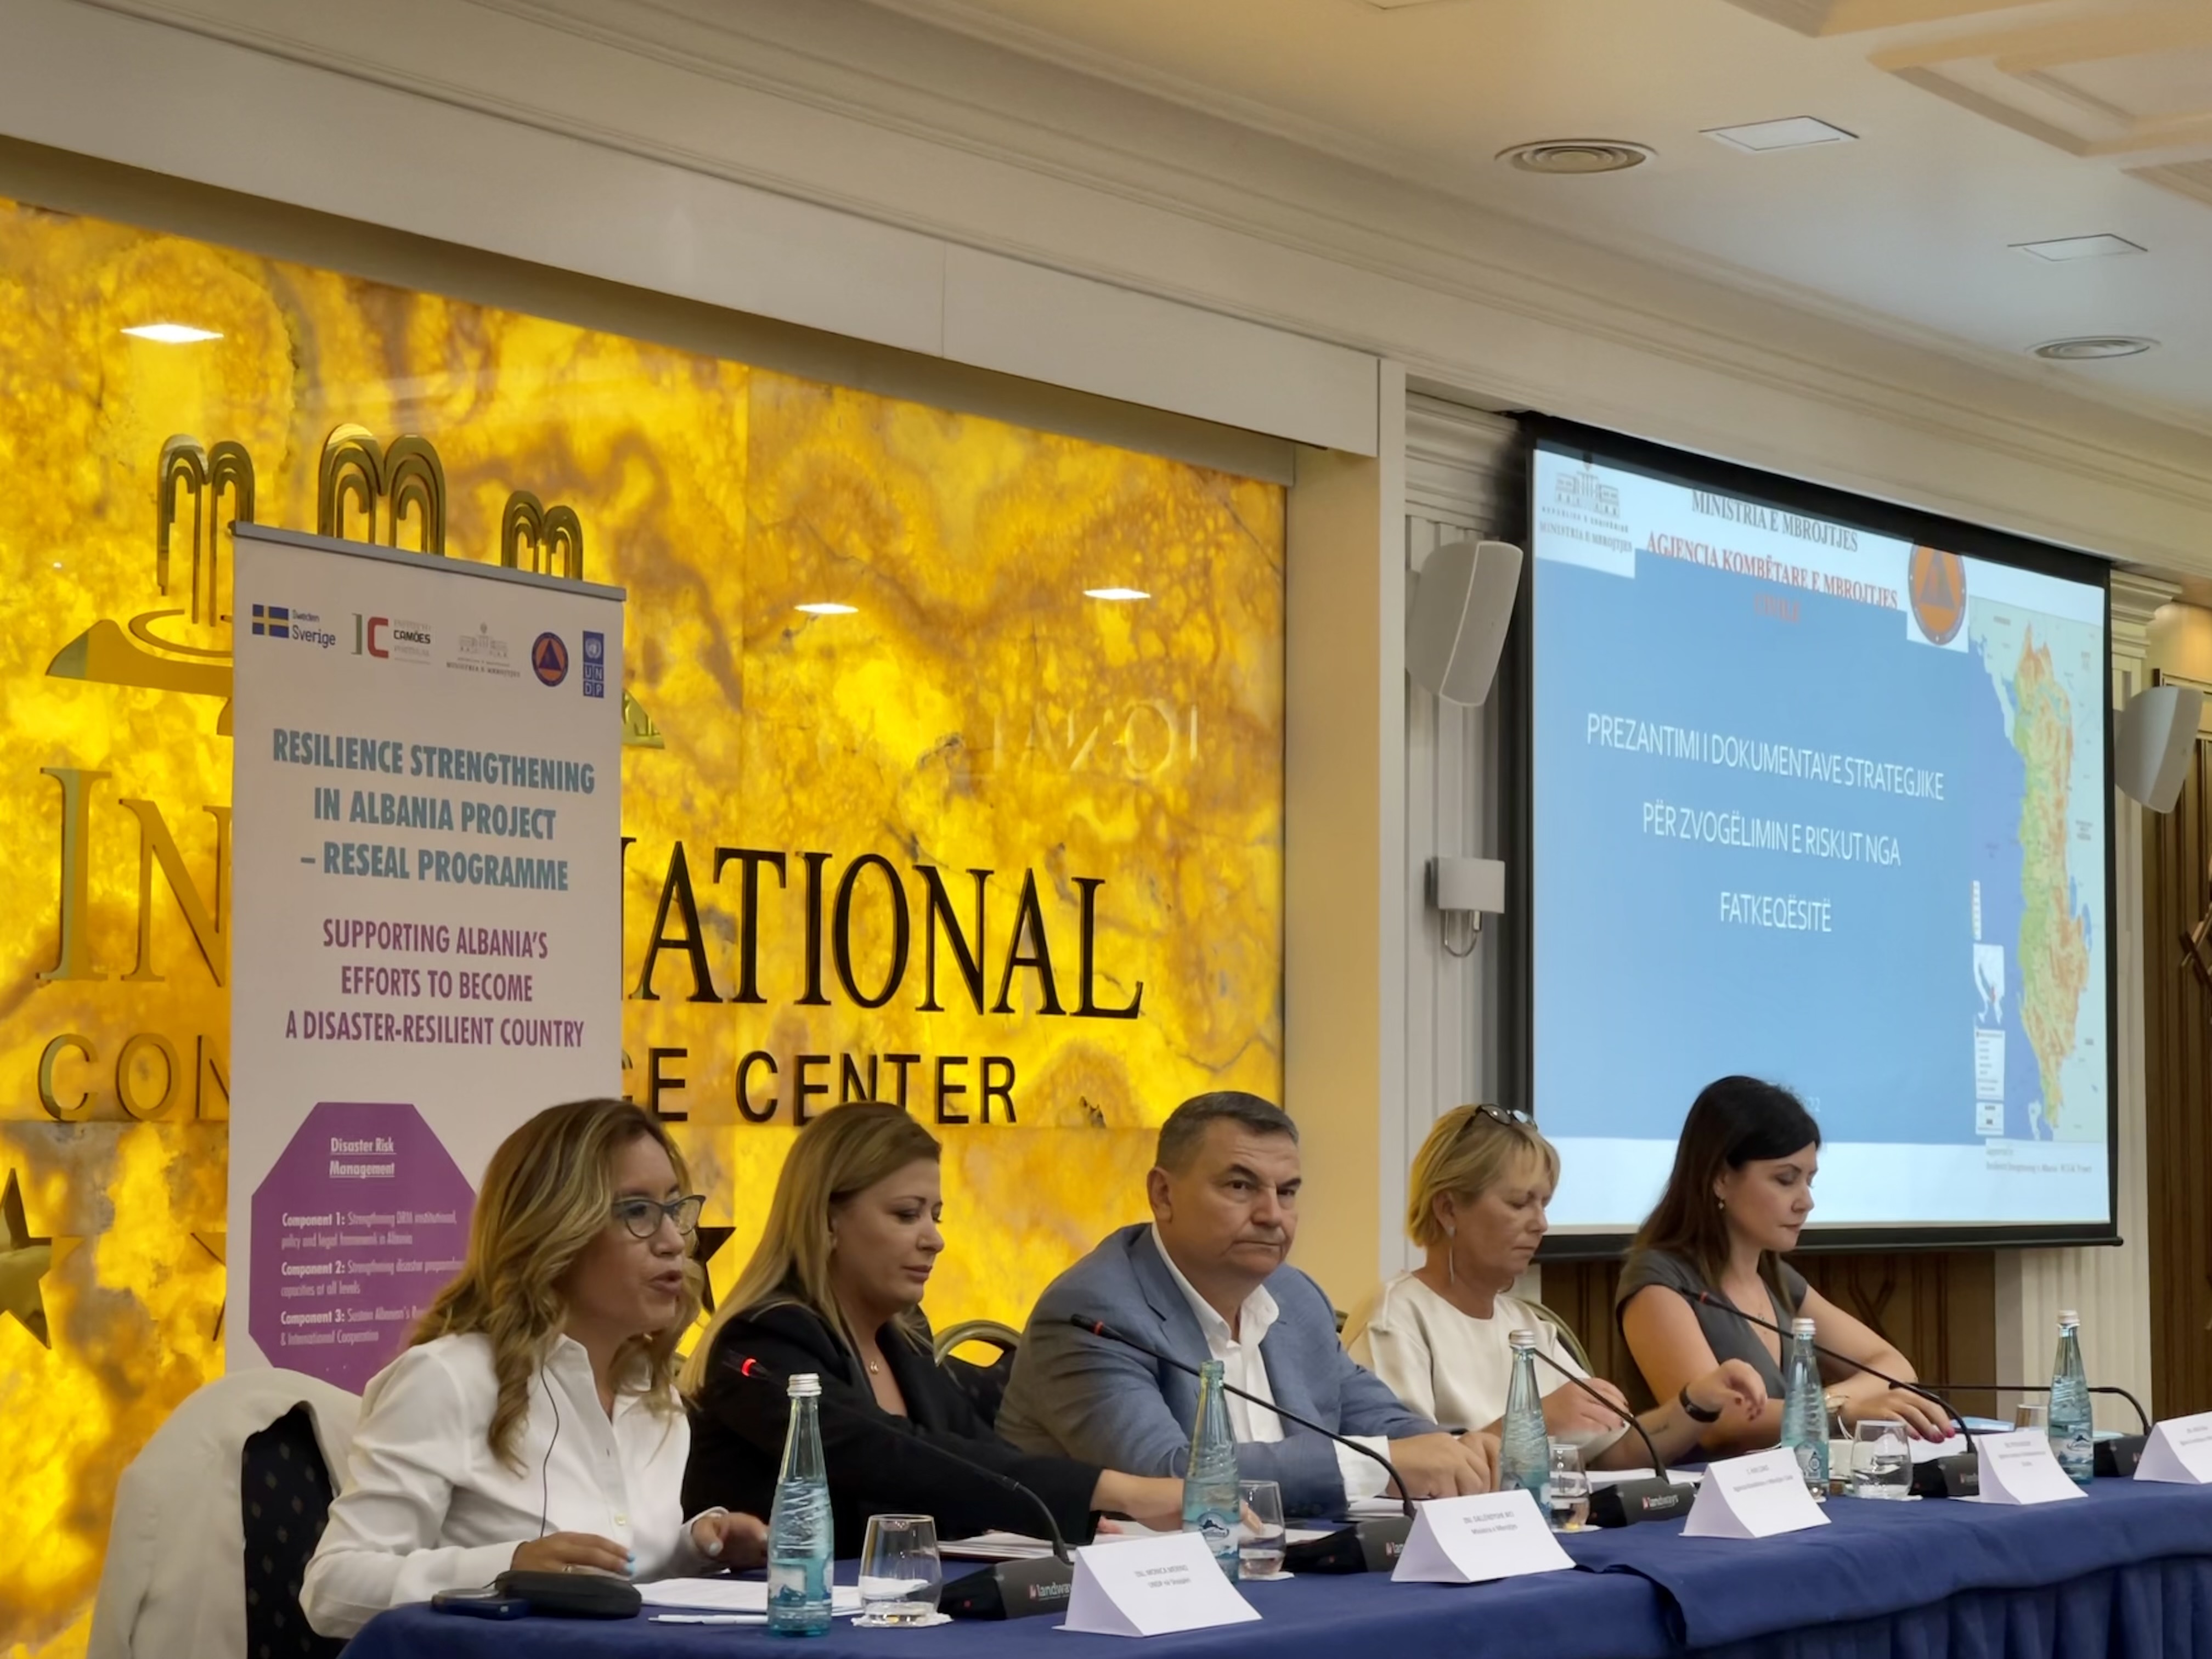 Inter-institutional political working group meeting on preparation of national Disaster Risk Reduction (DRR) strategic and planning documents in Albania